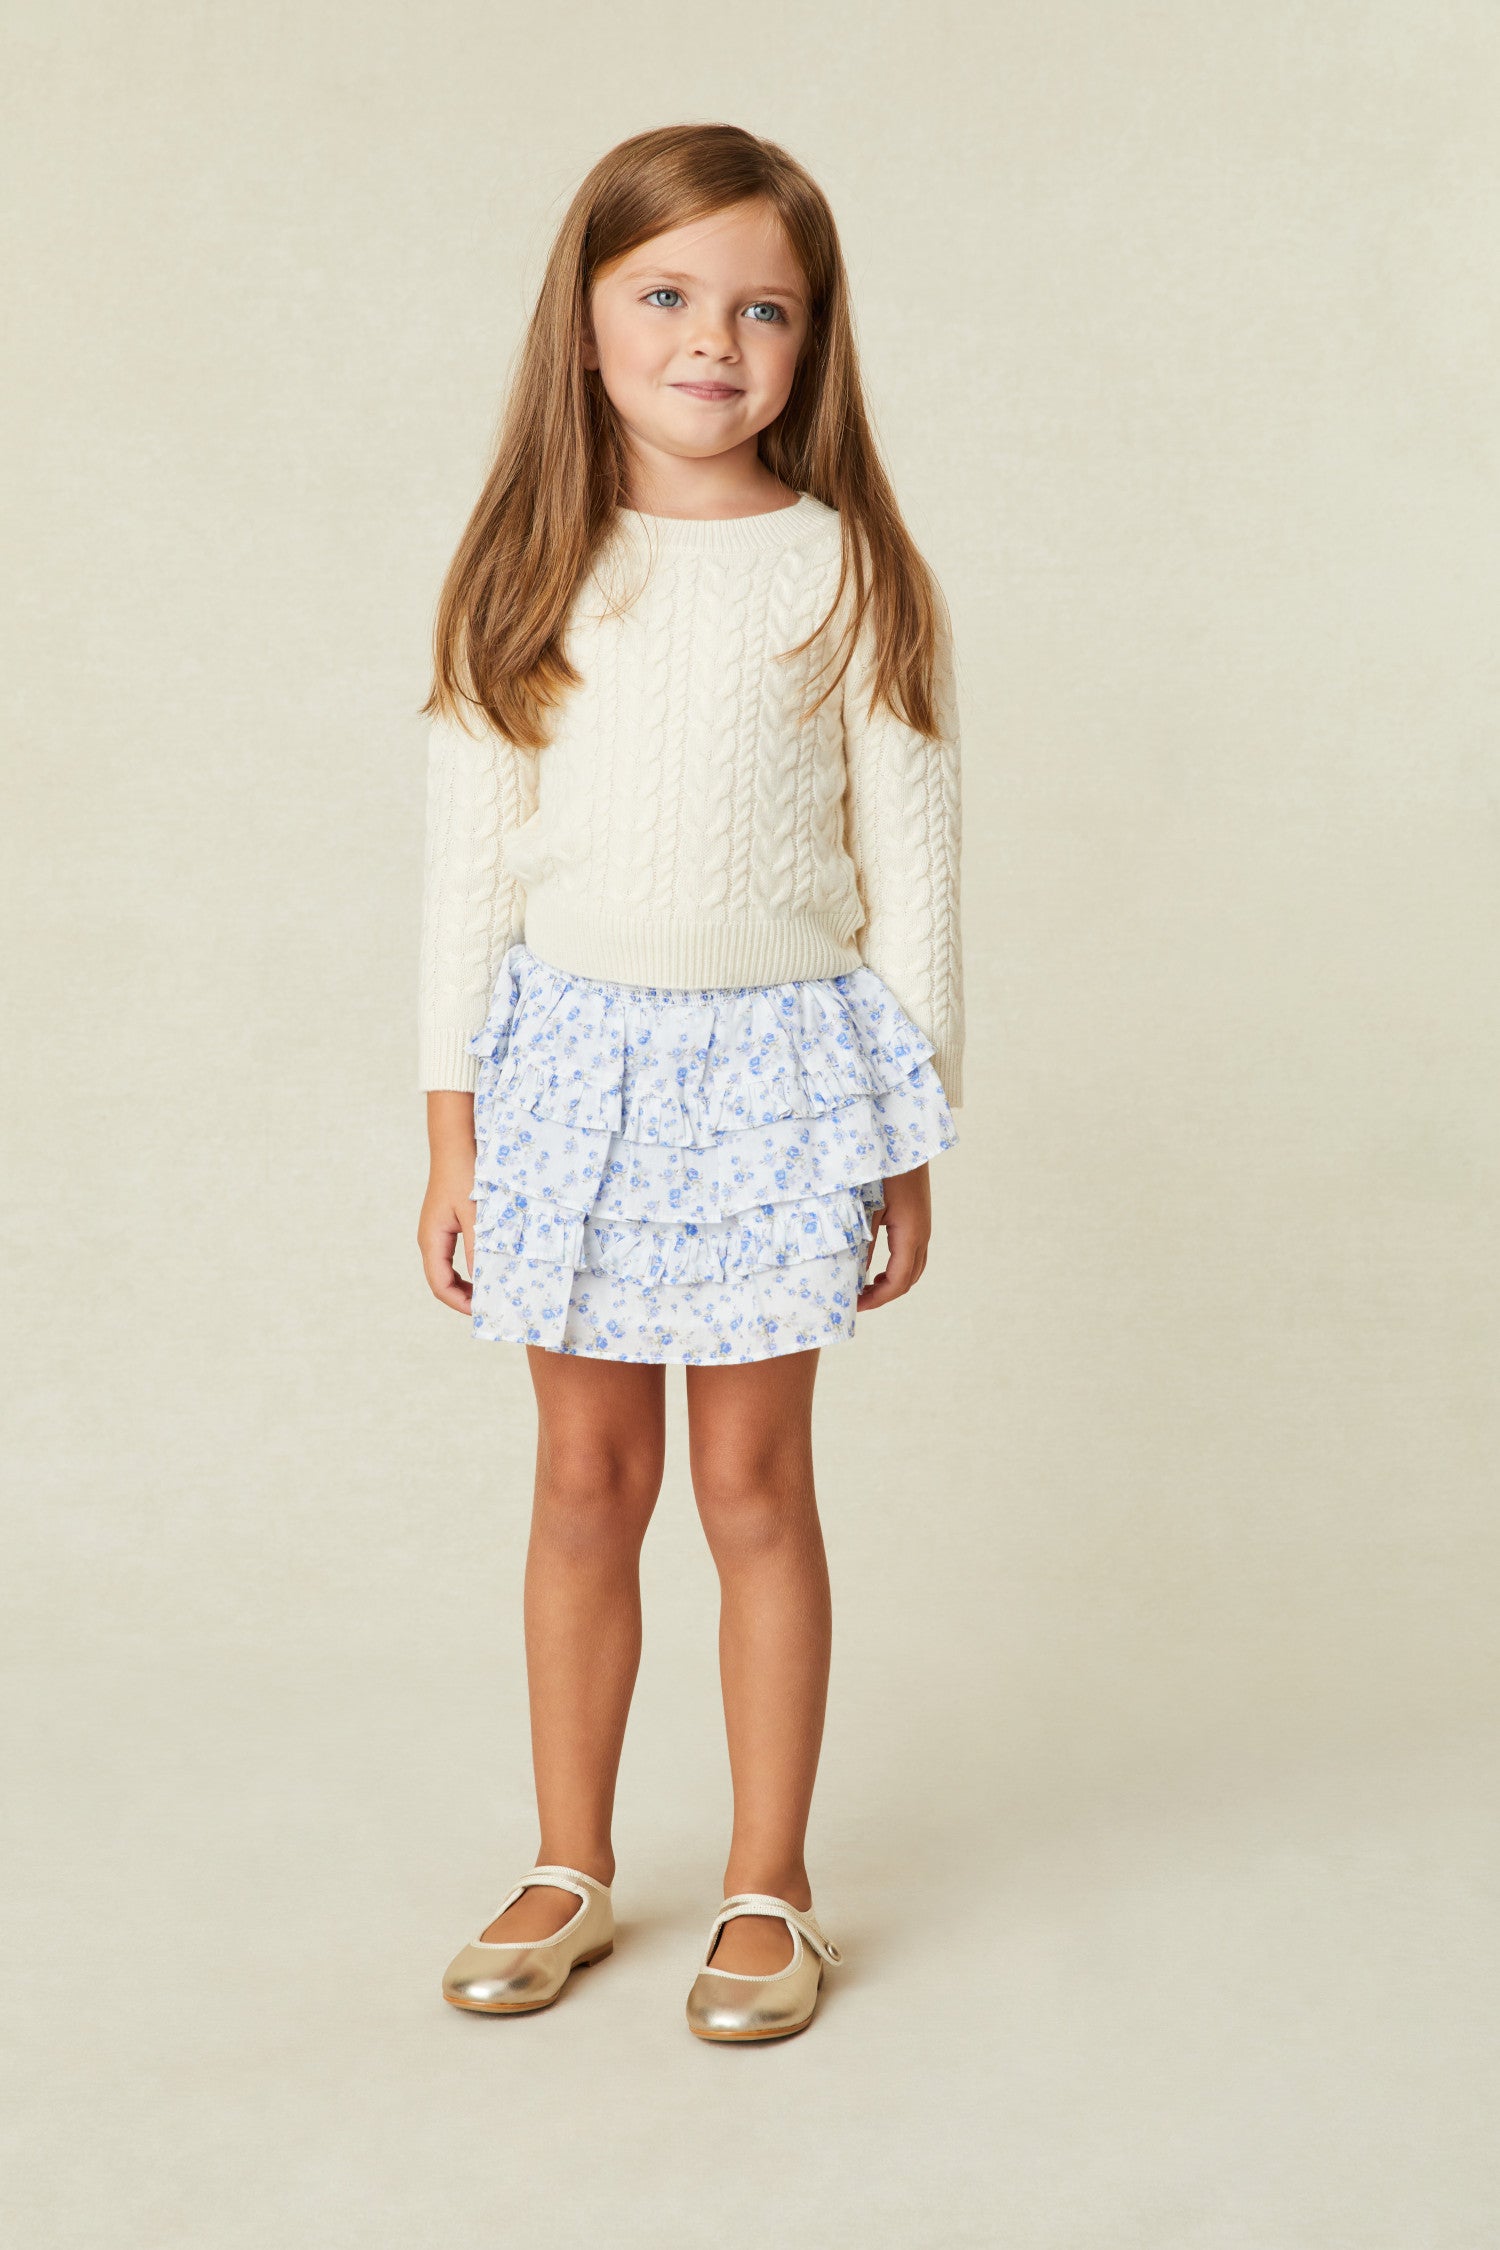 Girls white skirt with tiny blue flowers - wide smocked waistband, the skirt falls to two shirred tiers with ruffle details.